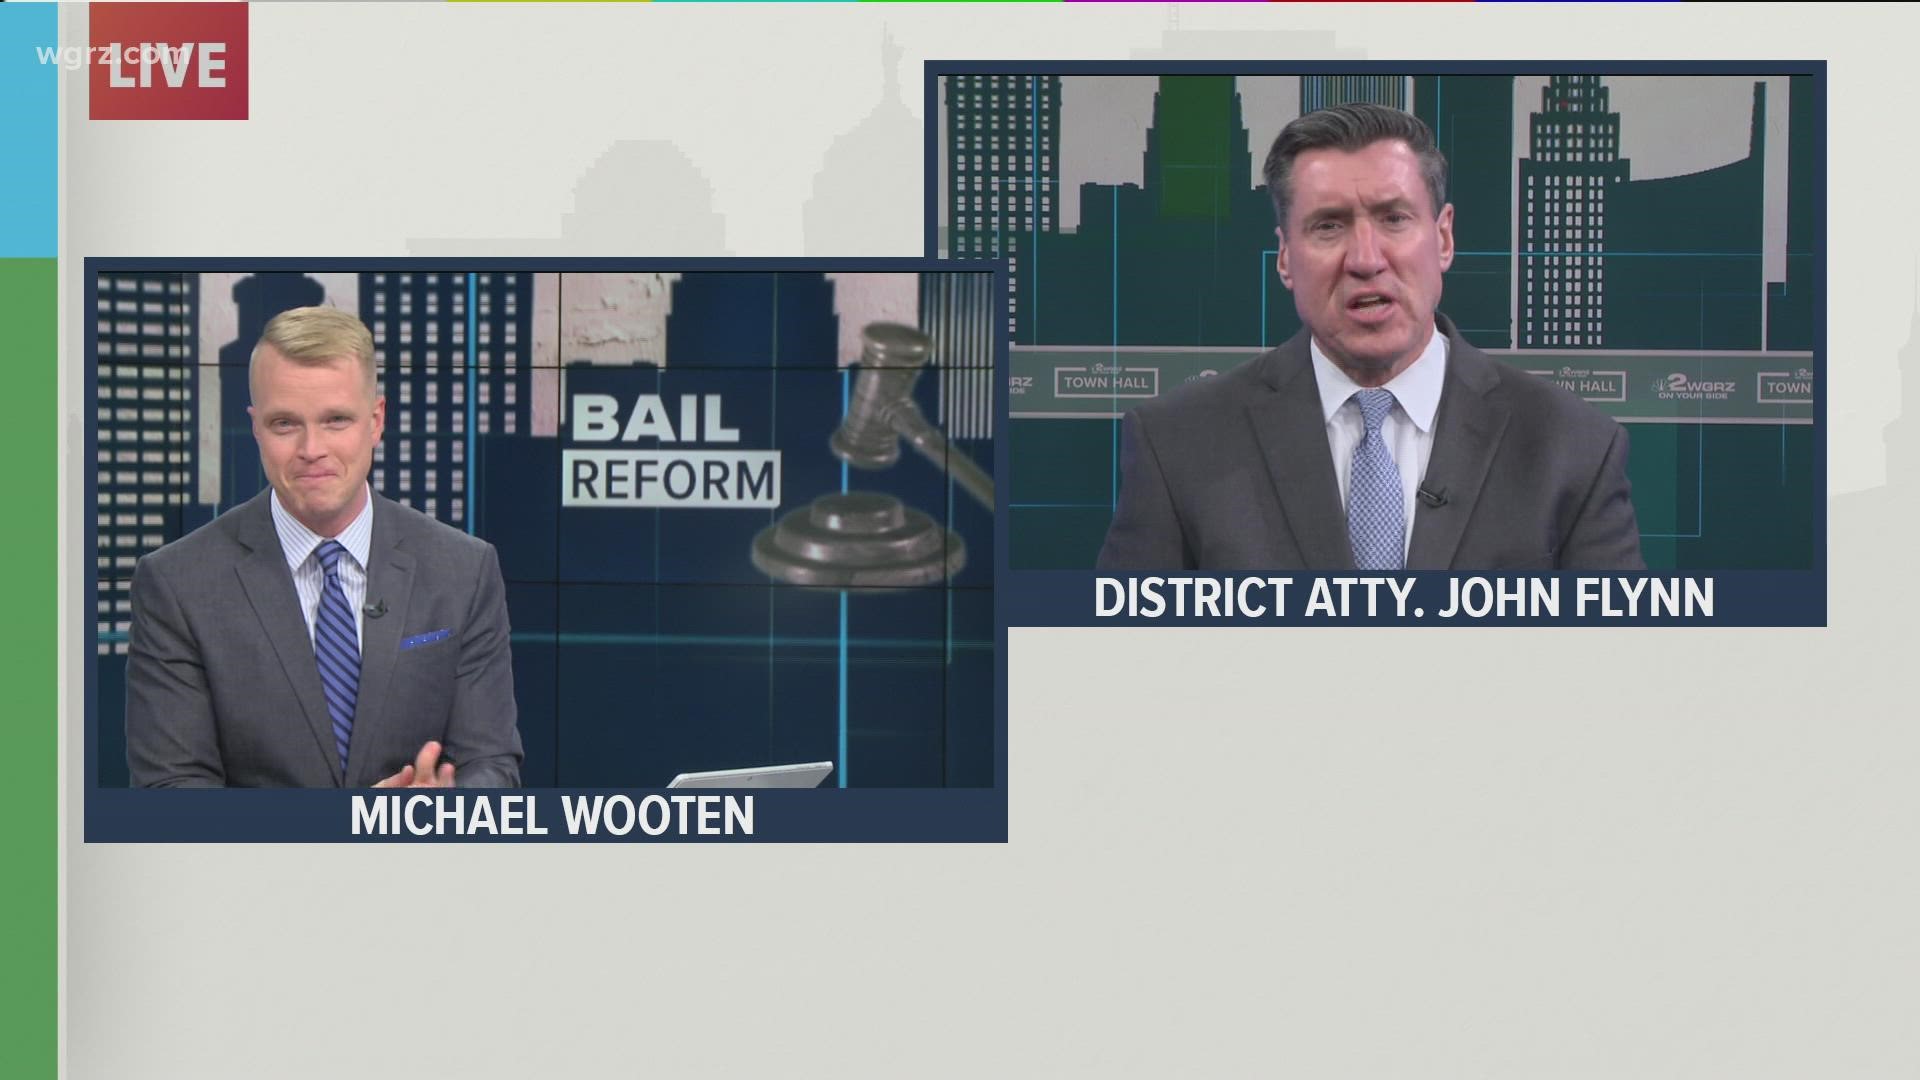 Erie County District Attorney John Flynn joined our Town Hall to discuss bail reform.